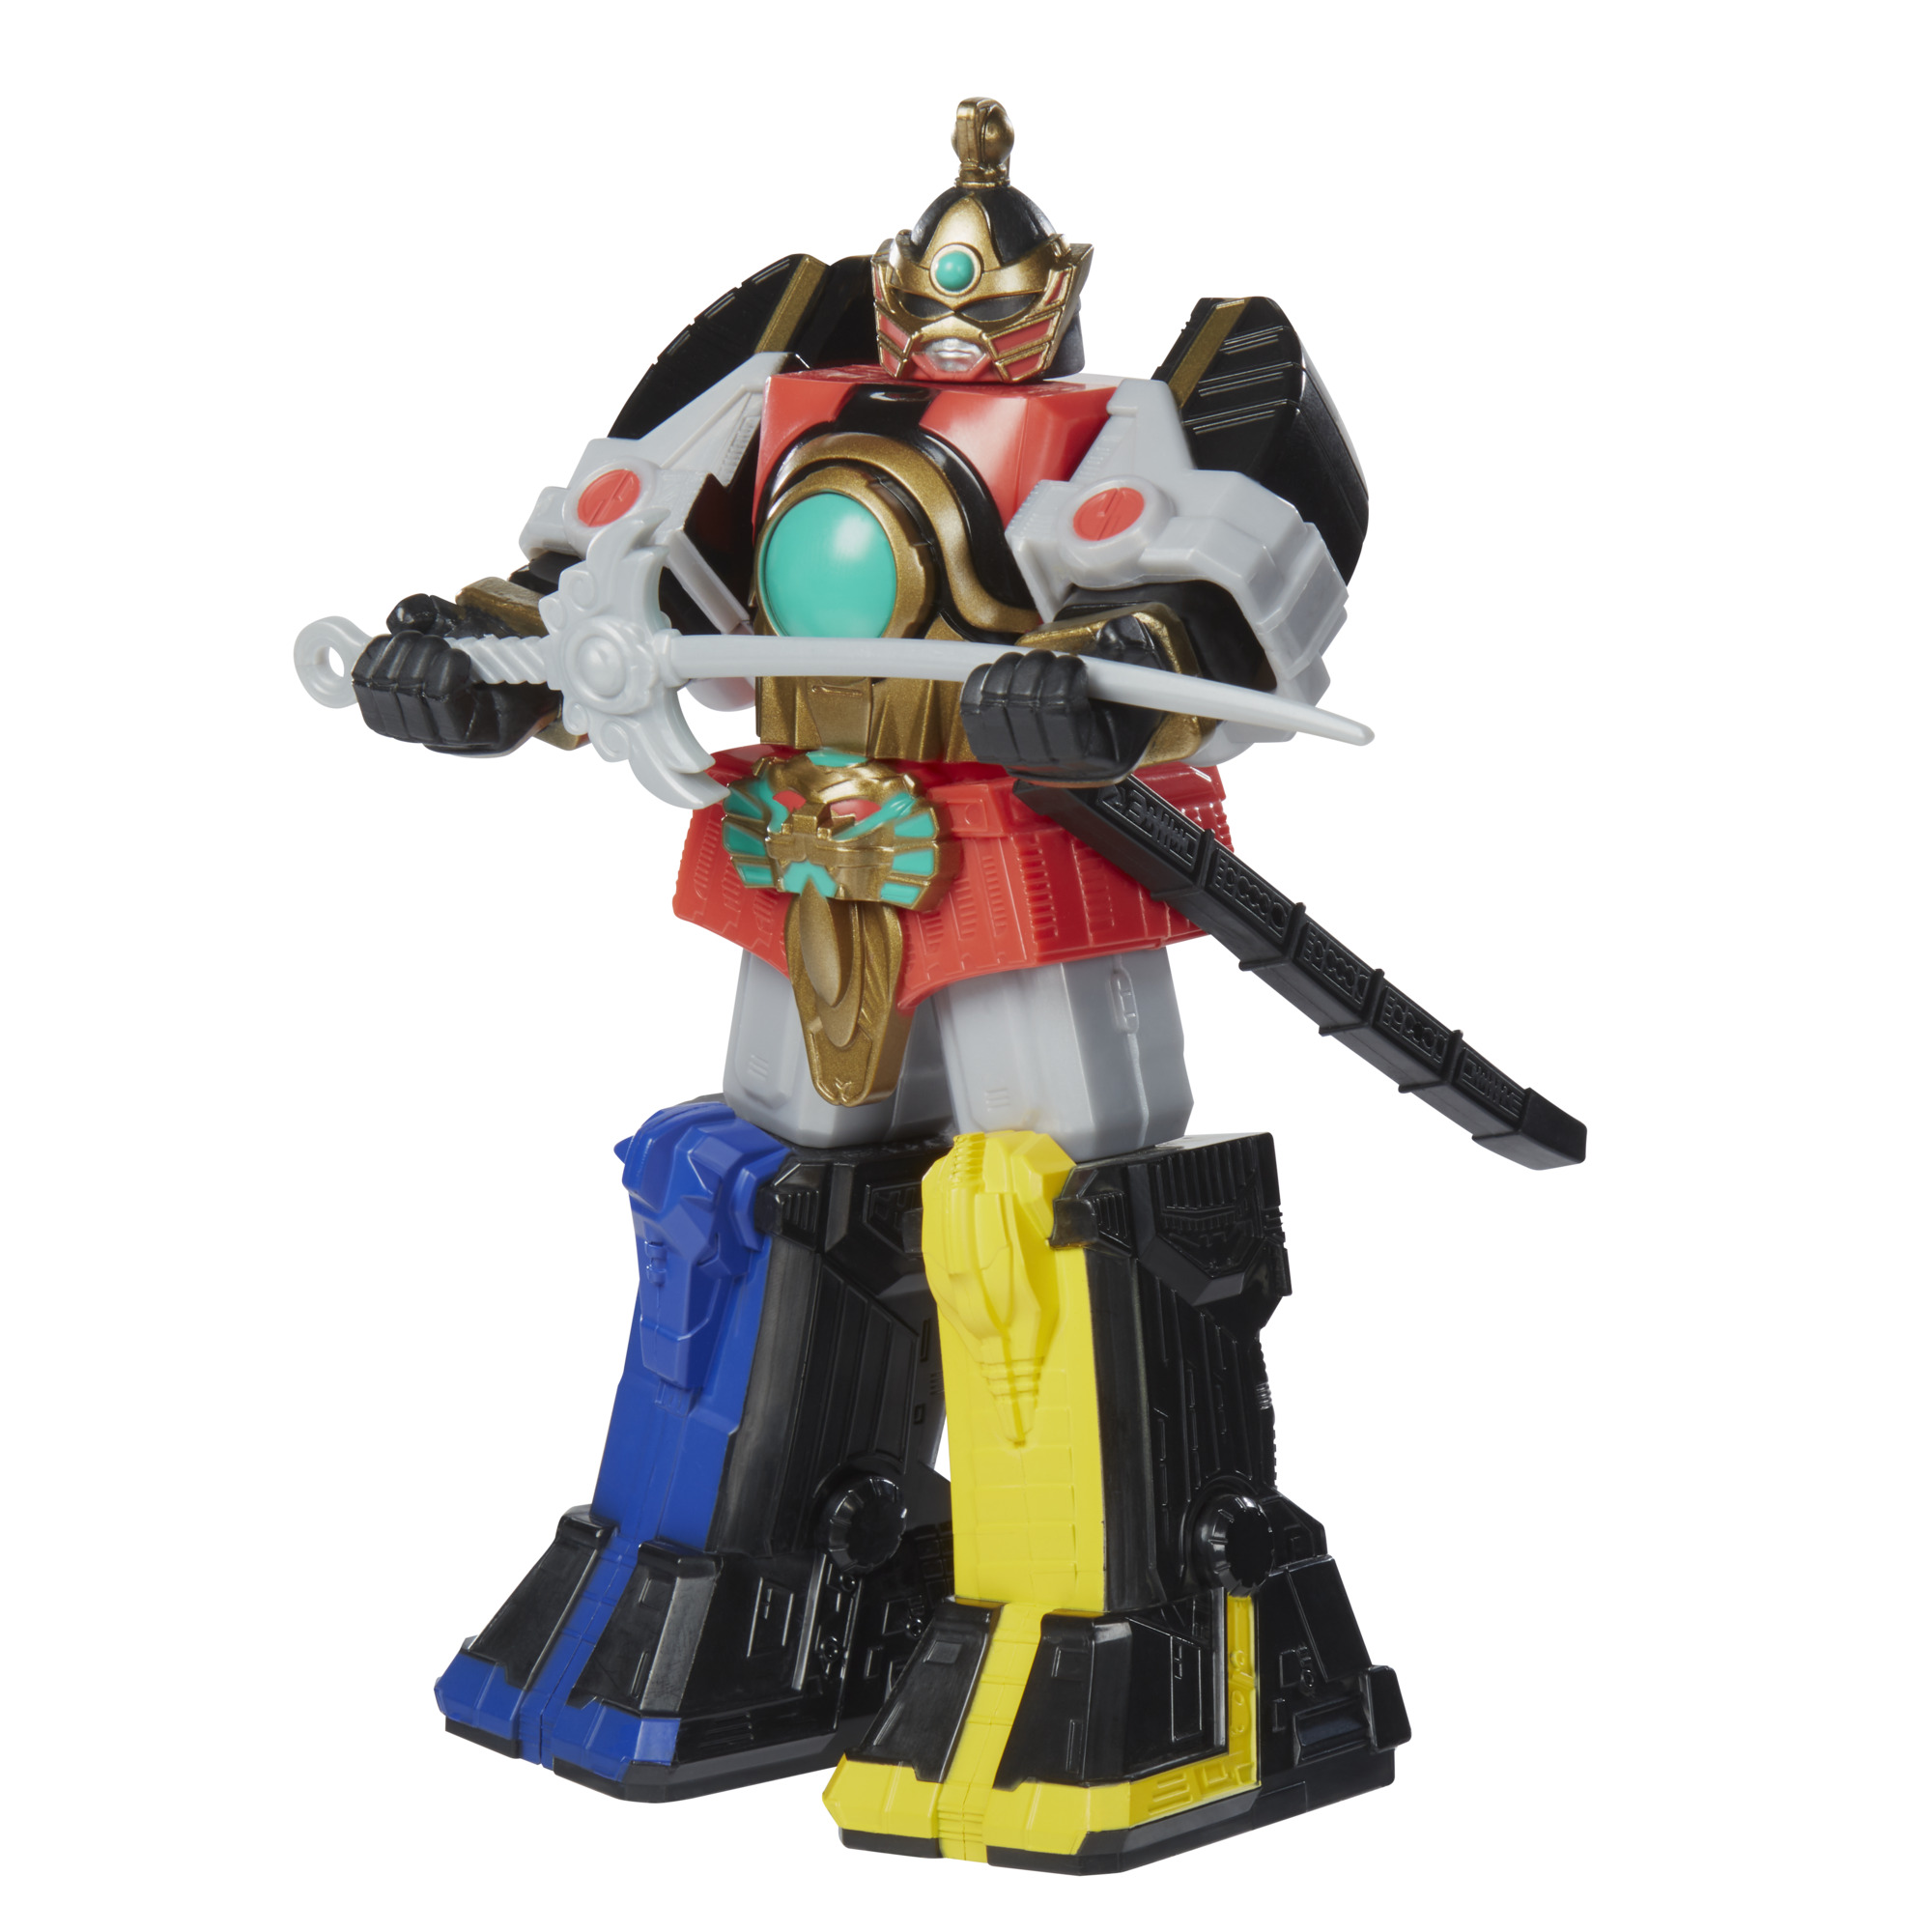 NEWS - Walmart Collector Con 2021 – ALL NEW Power Rangers 7-Inch 